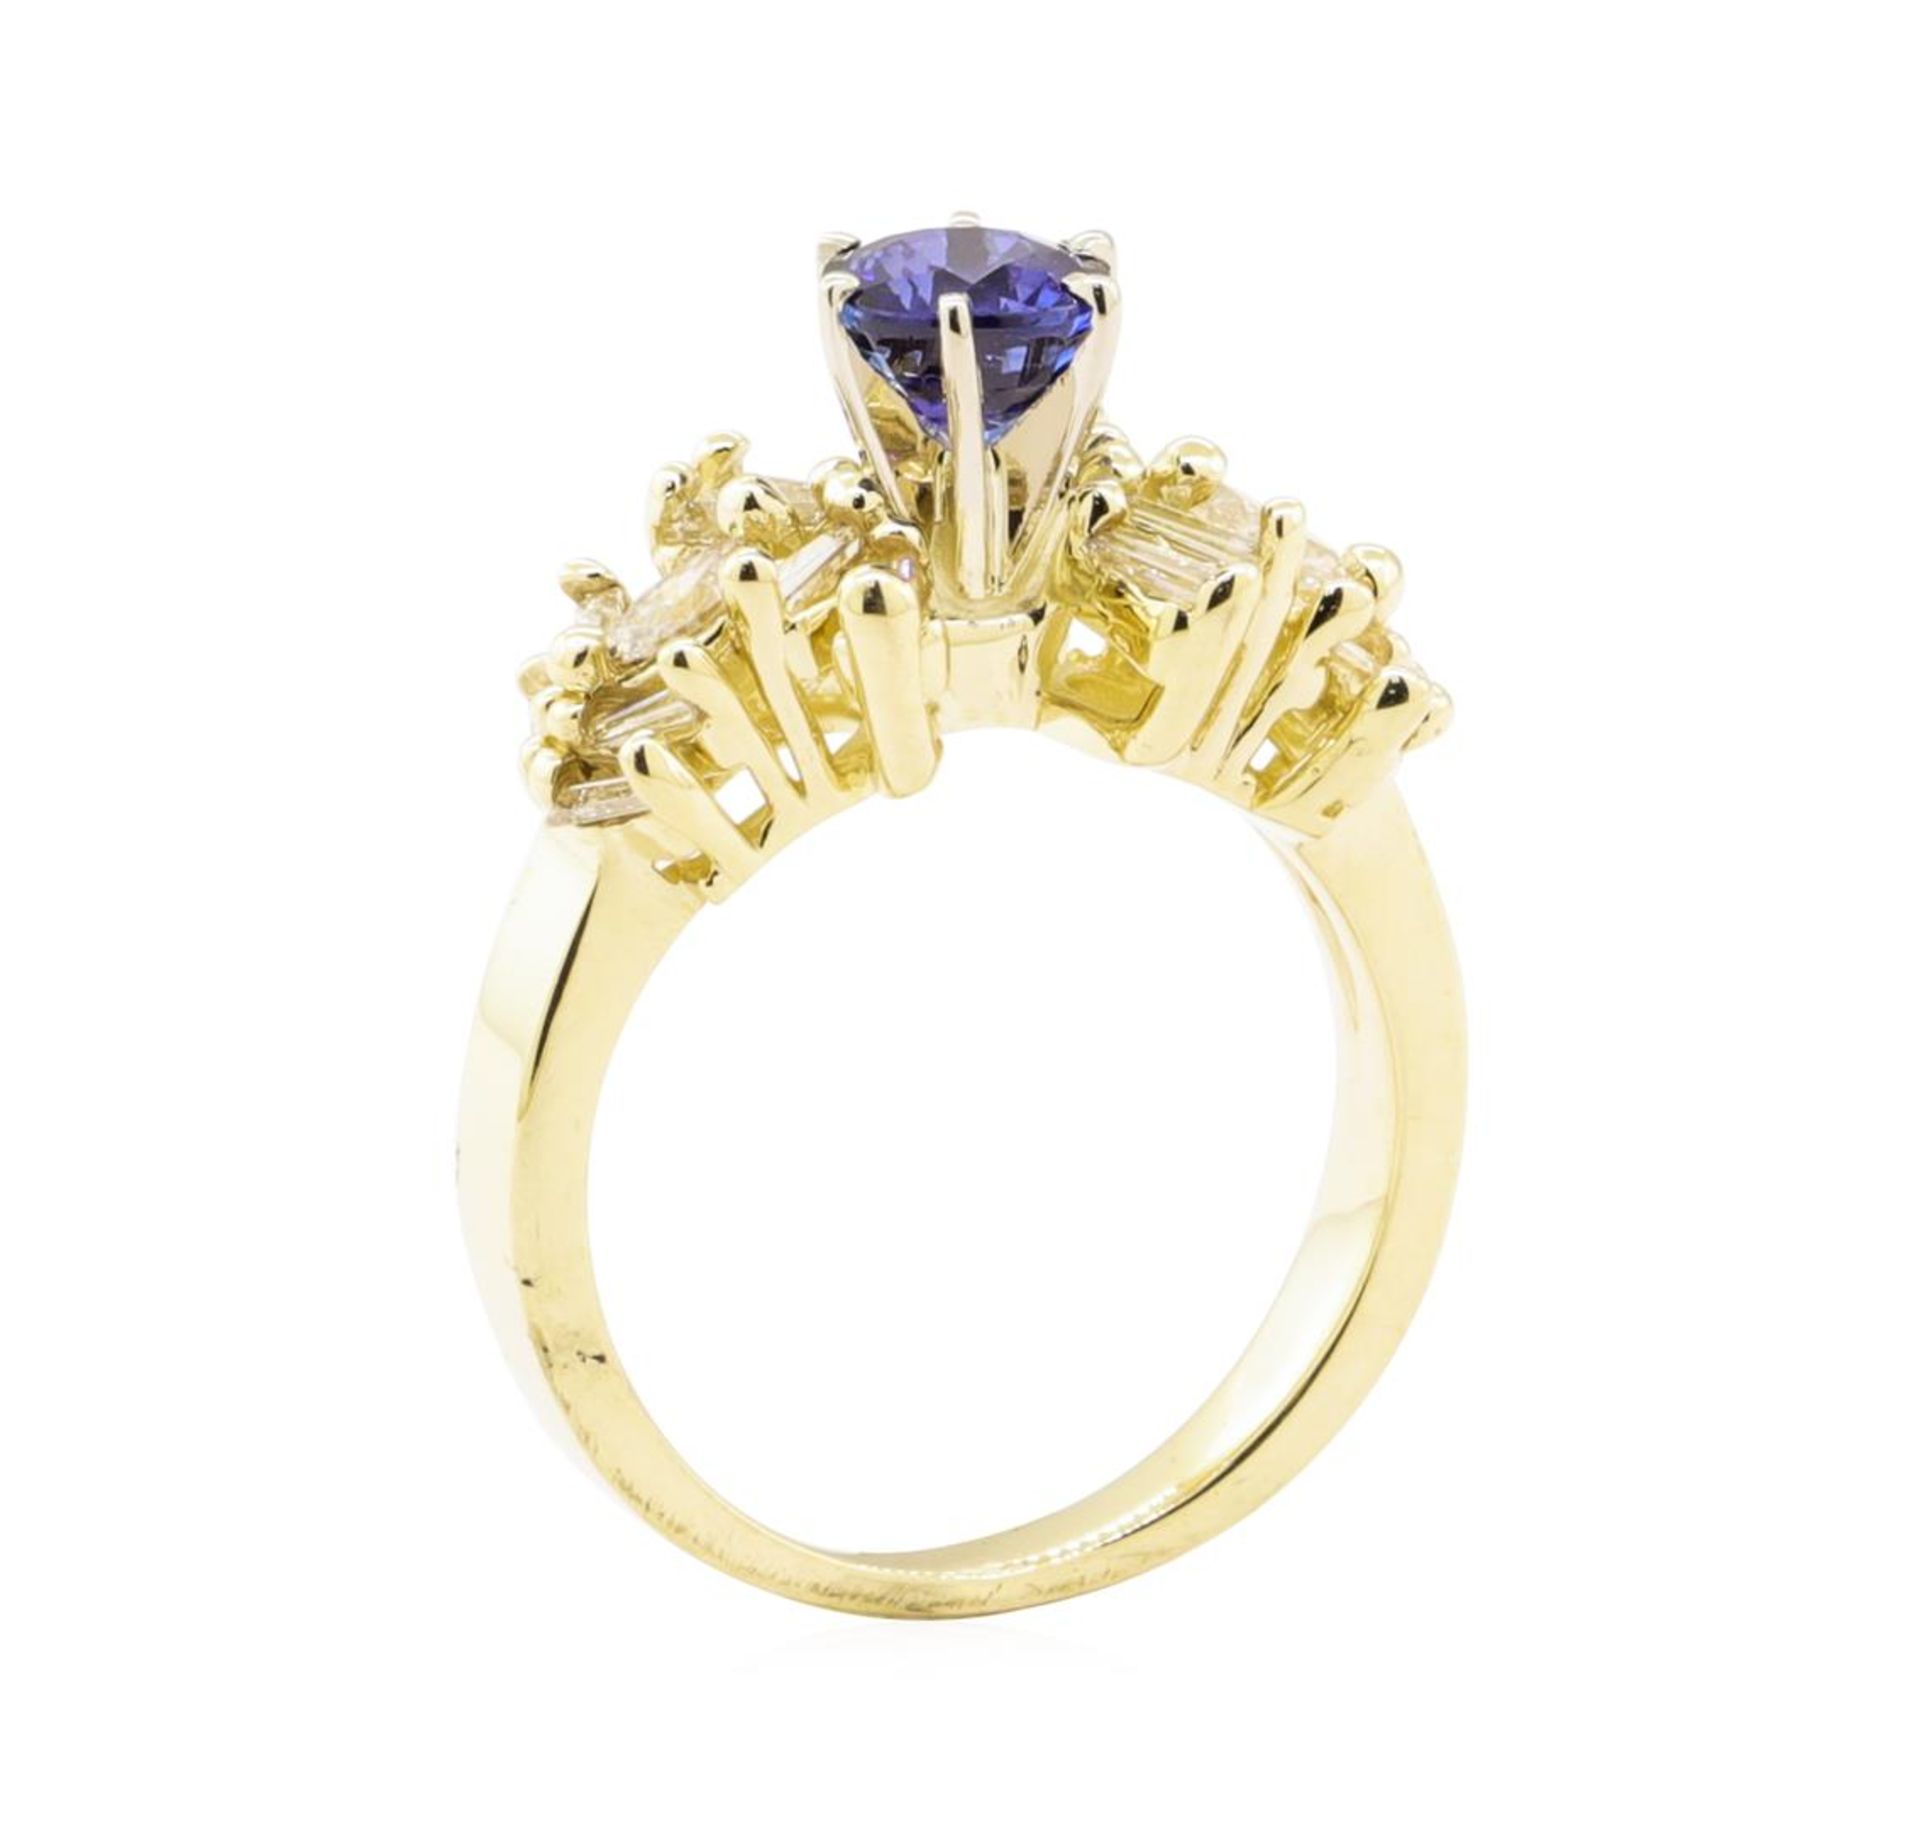 1.60 ctw Blue Sapphire And Diamond Ring - 14KT Yellow Gold - Image 4 of 5